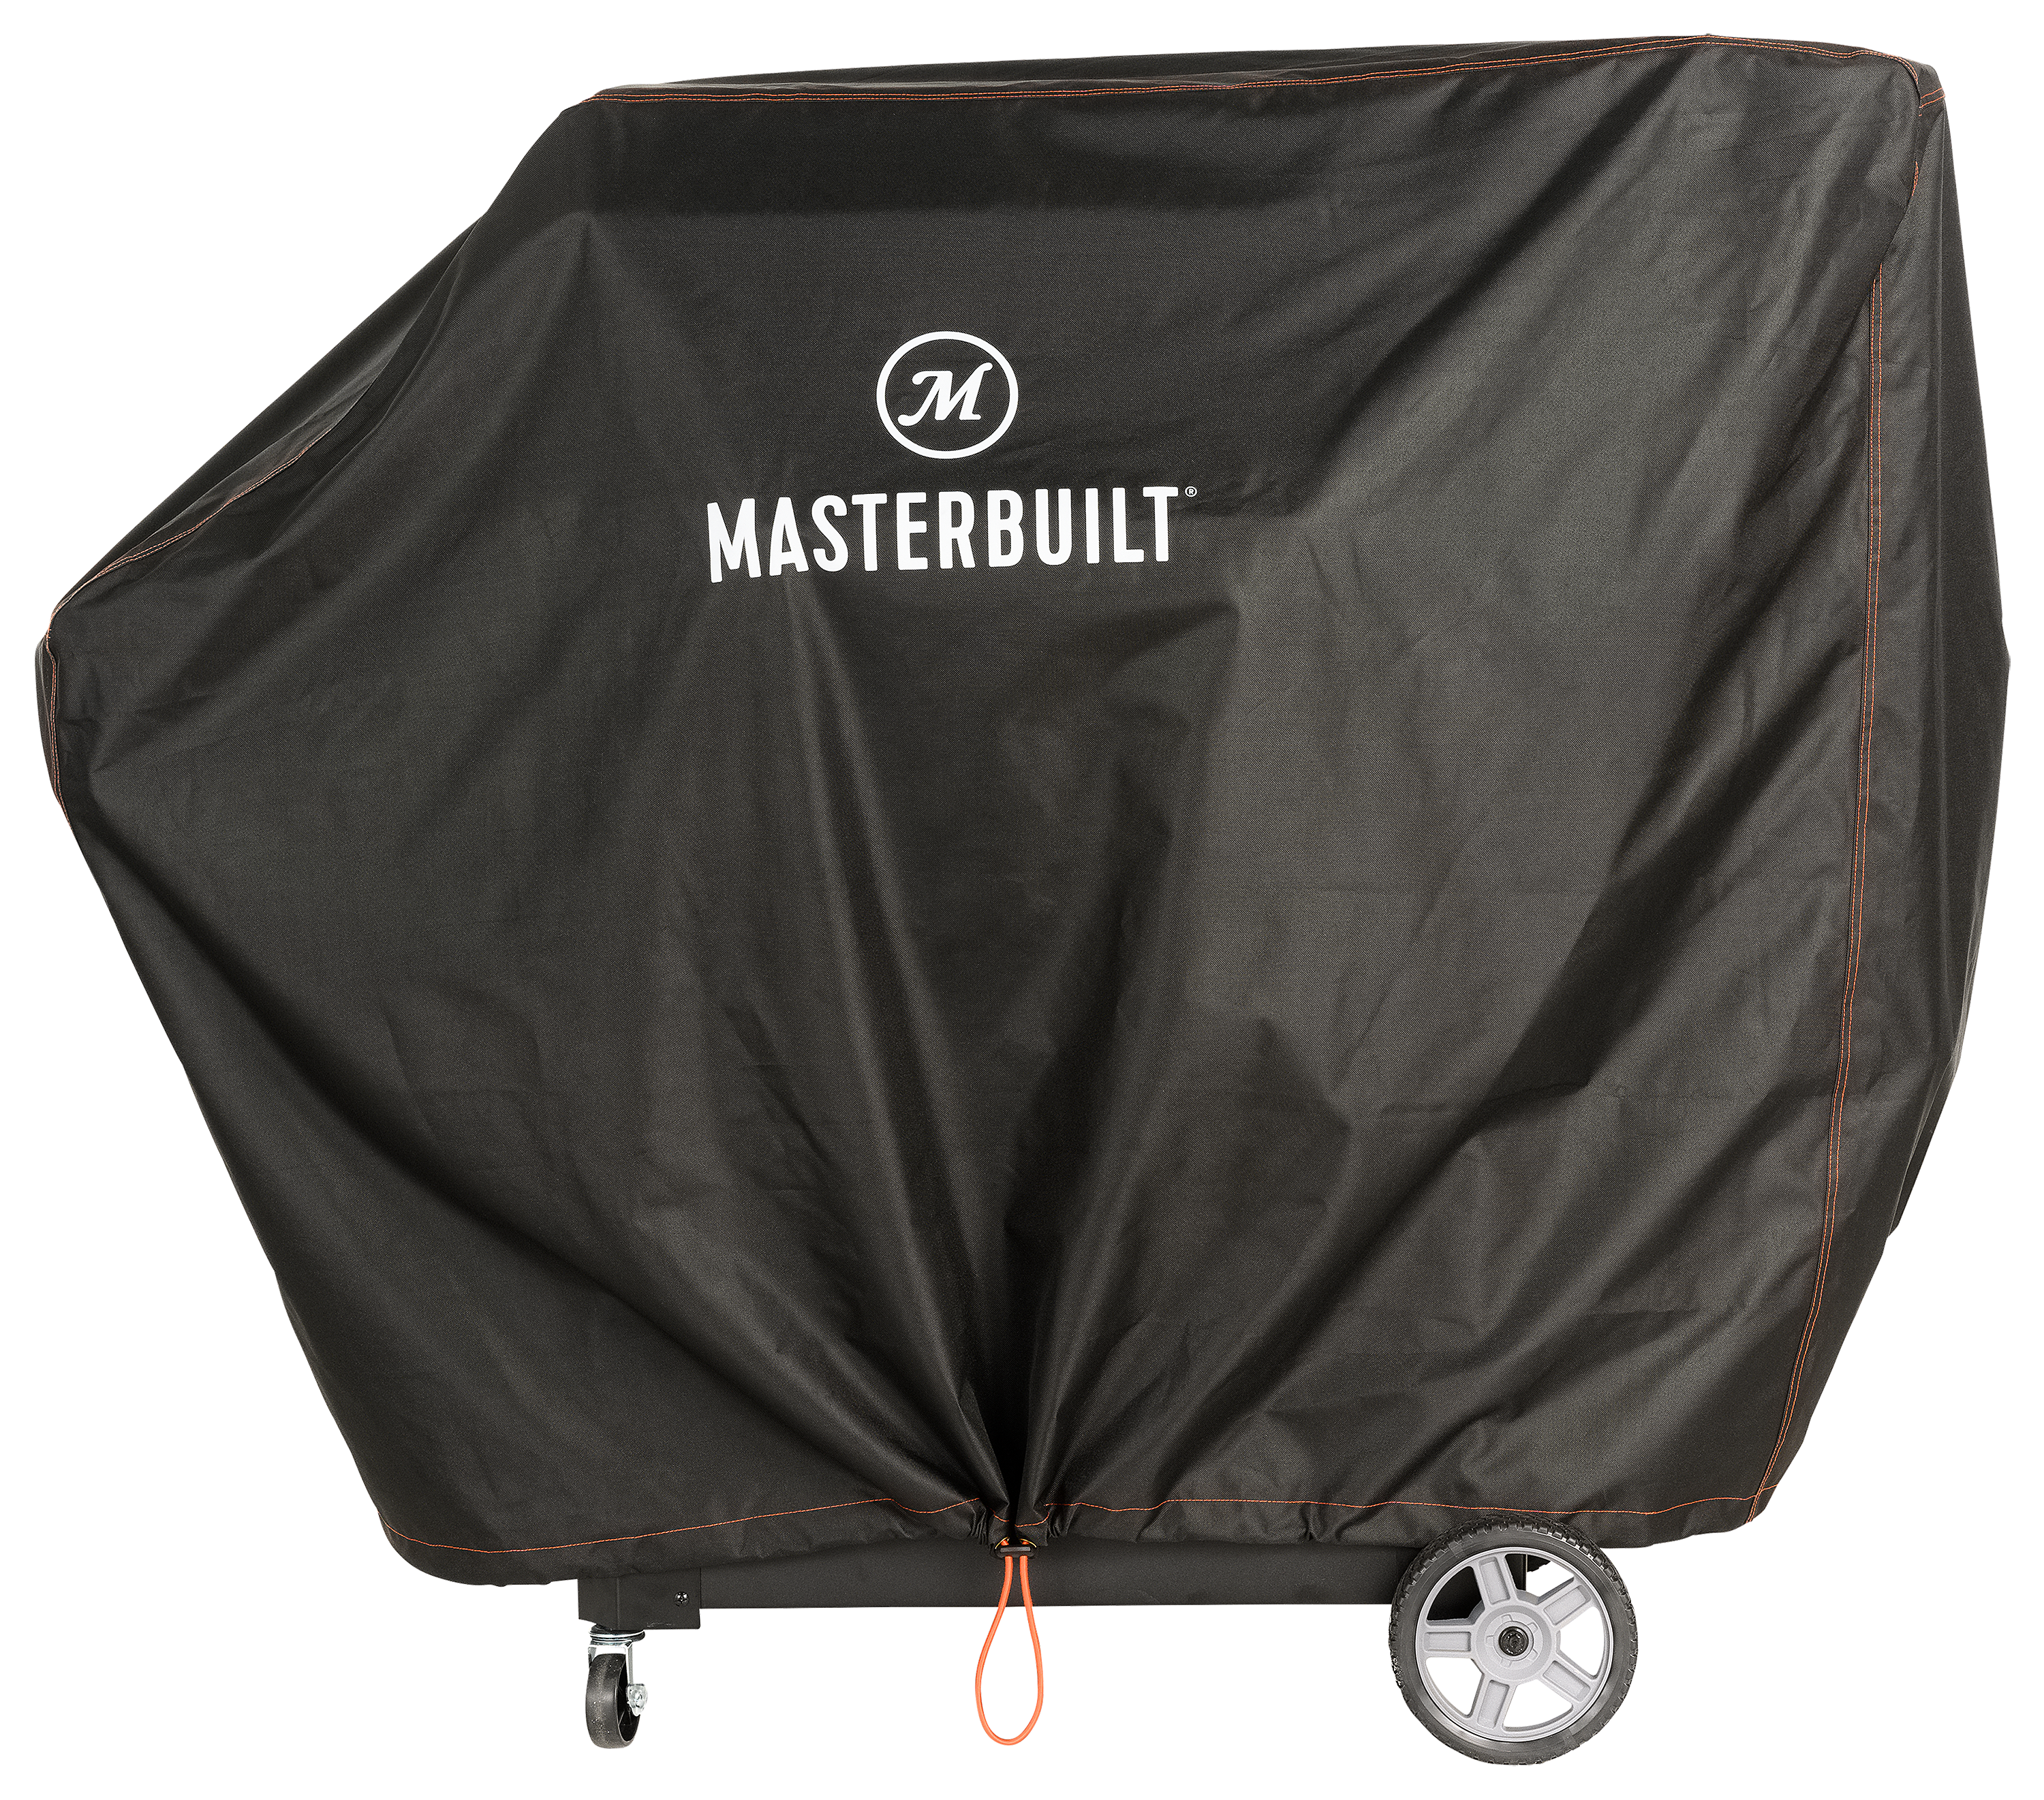 Masterbuilt Gravity Series 1050 Digital Charcoal Grill and Smoker Cover